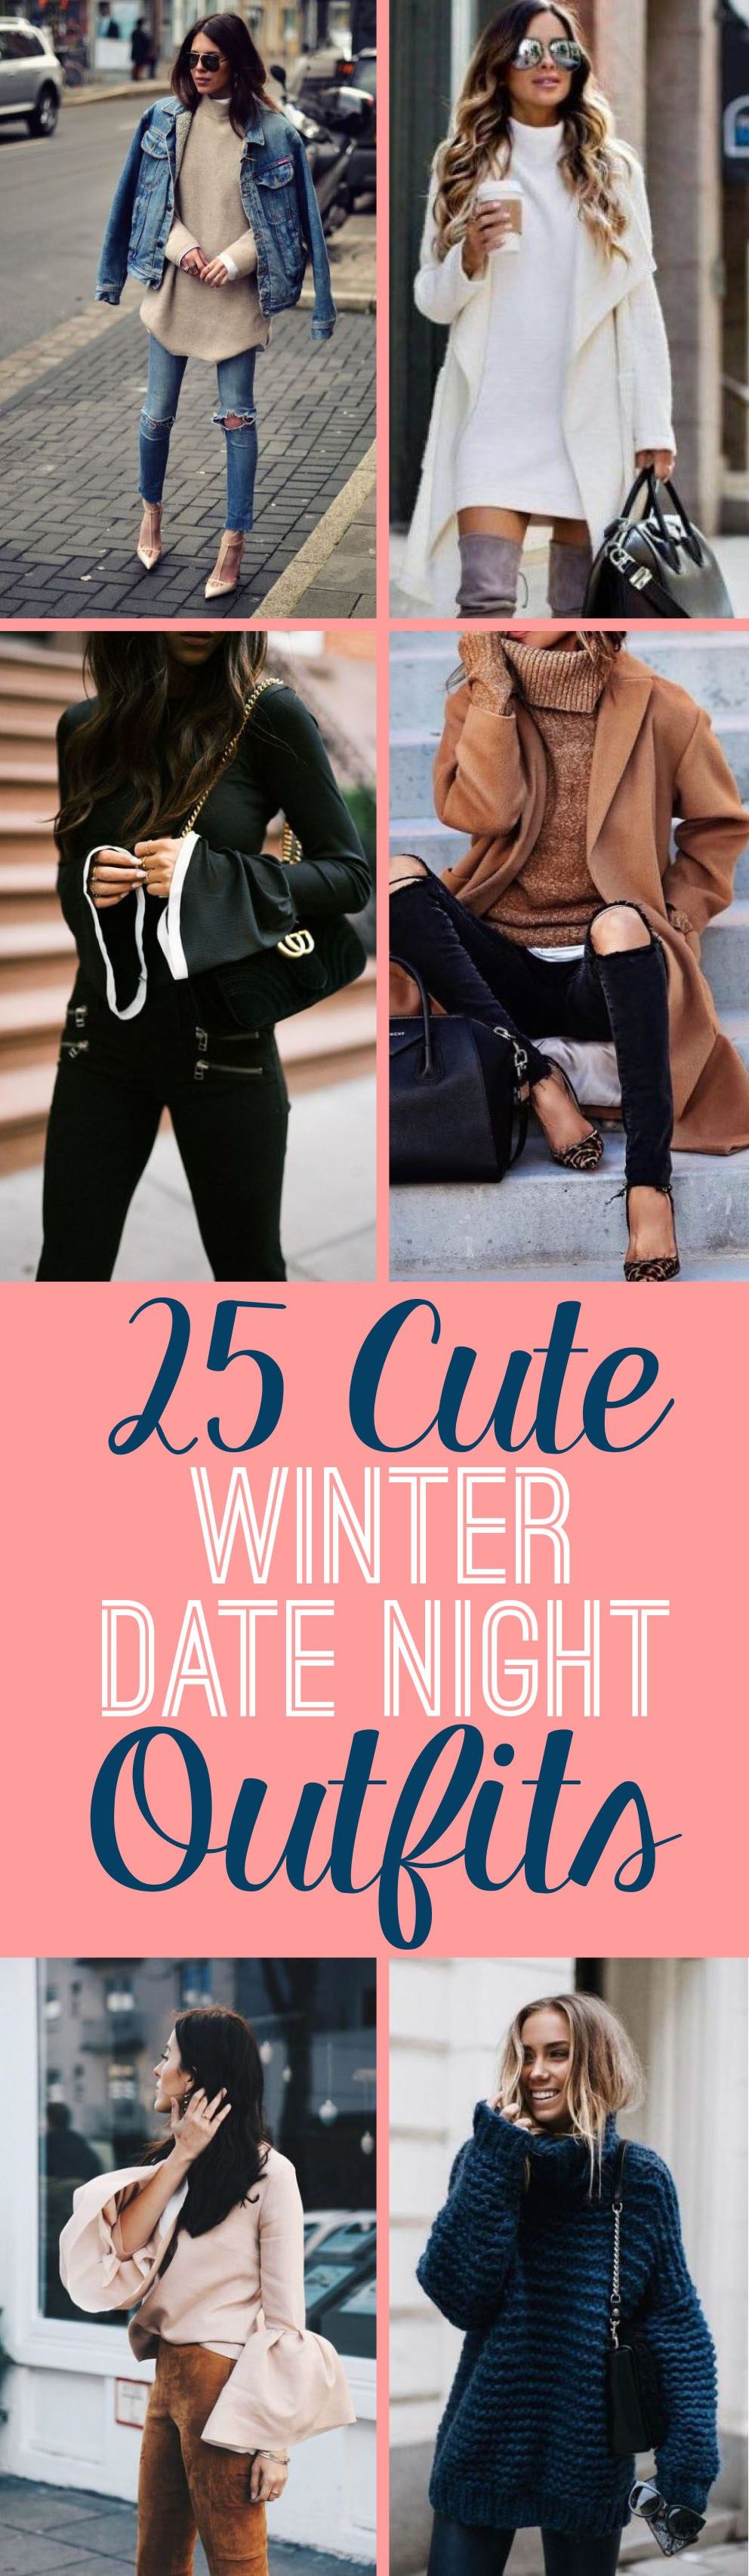 Couple Winter Date Night Outfits